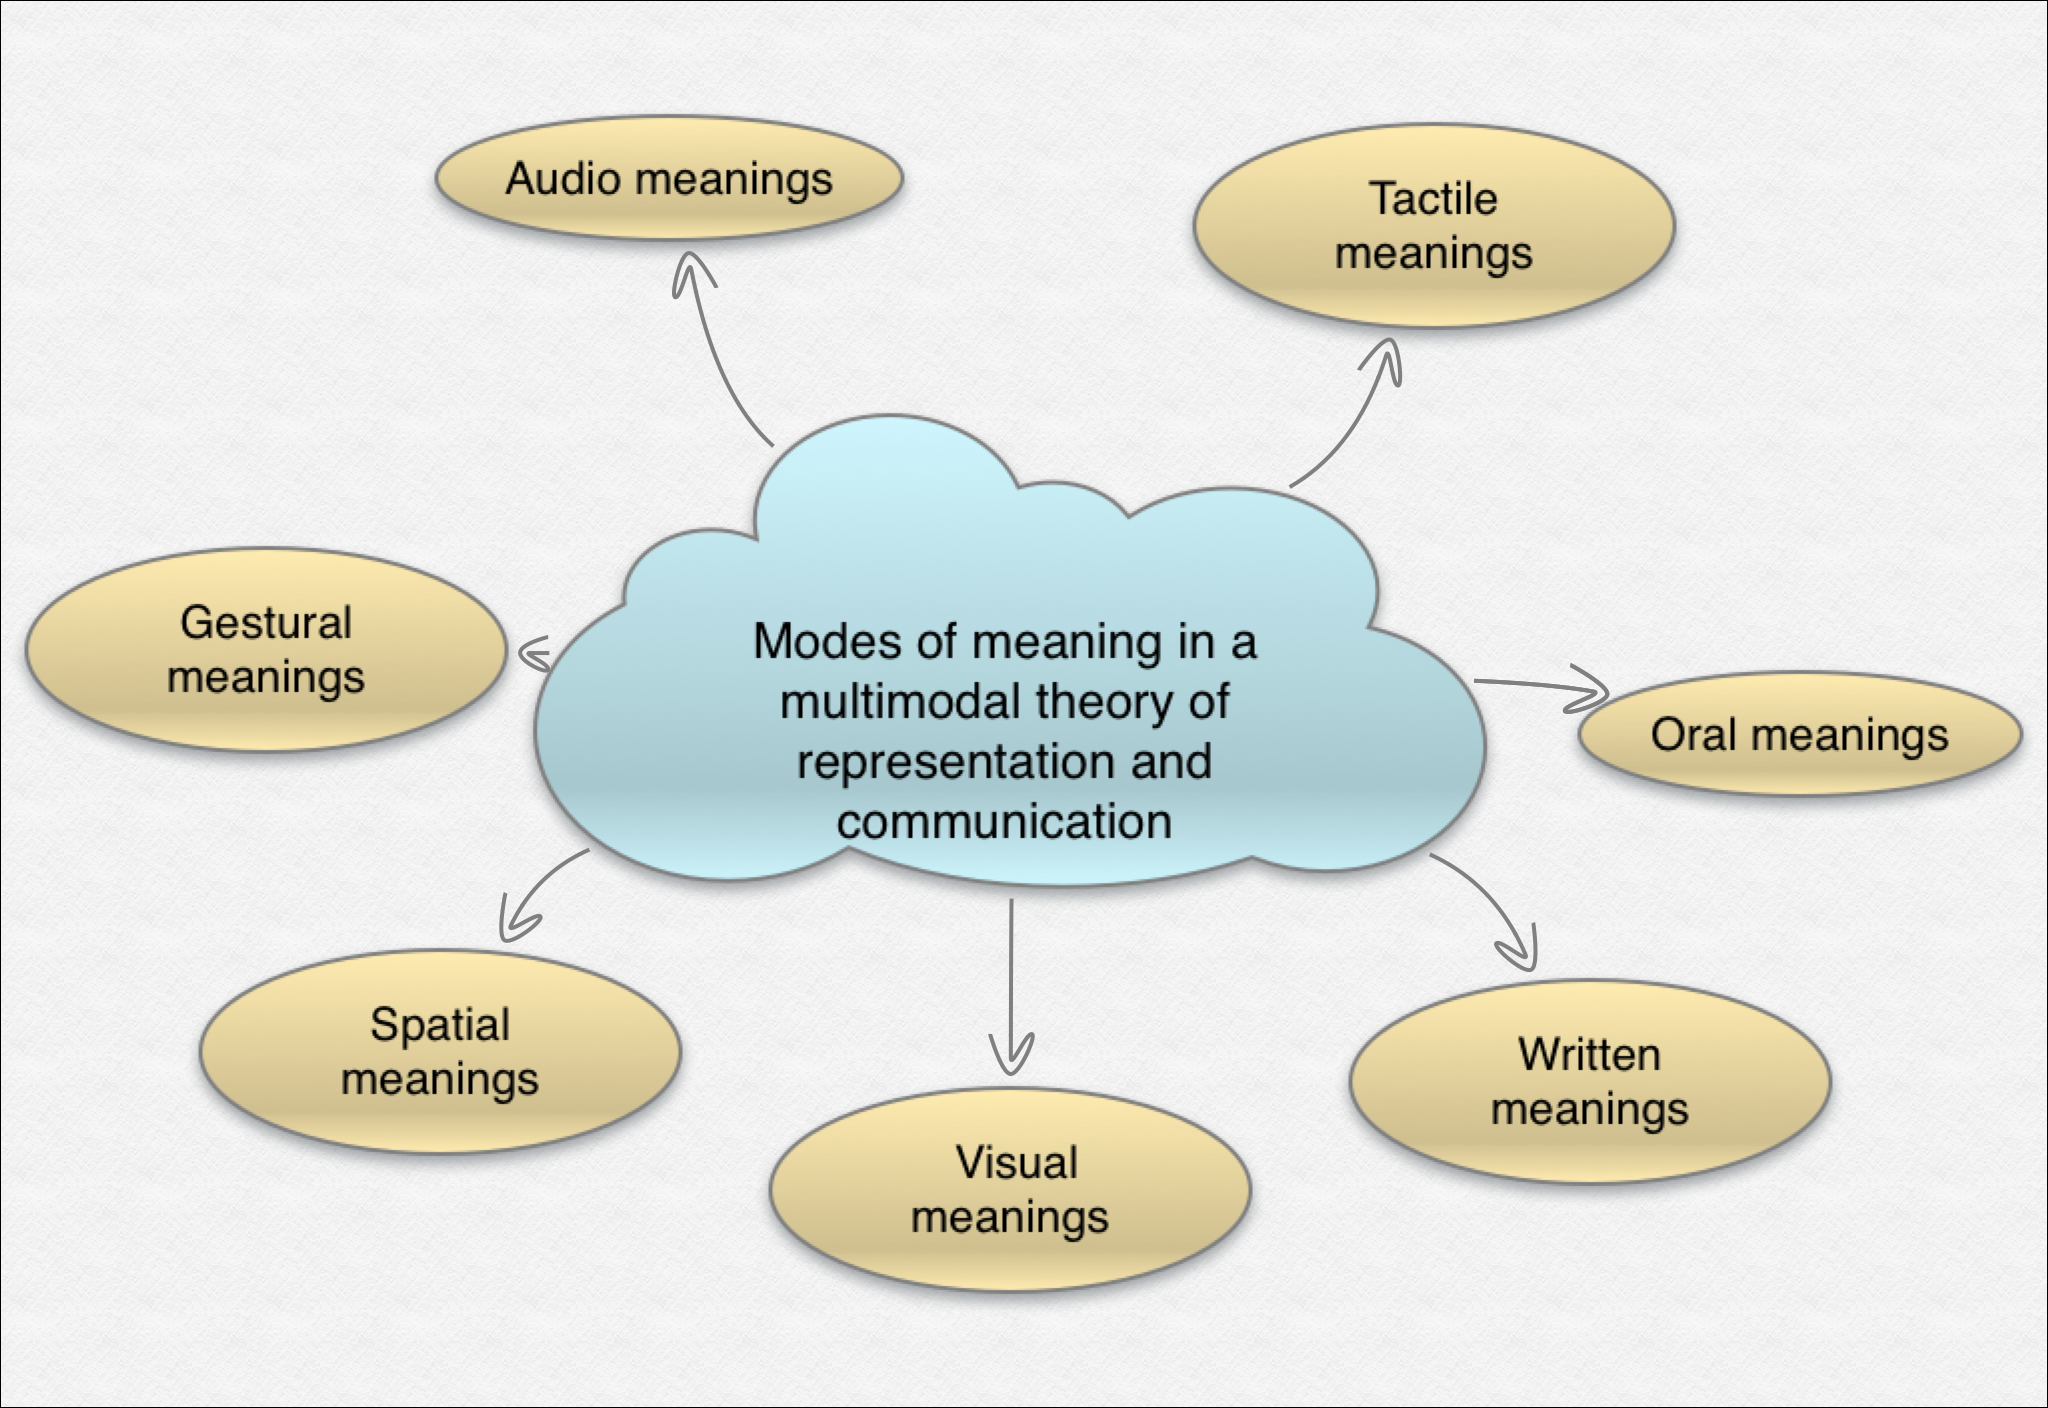 modes of multimodal meaning.